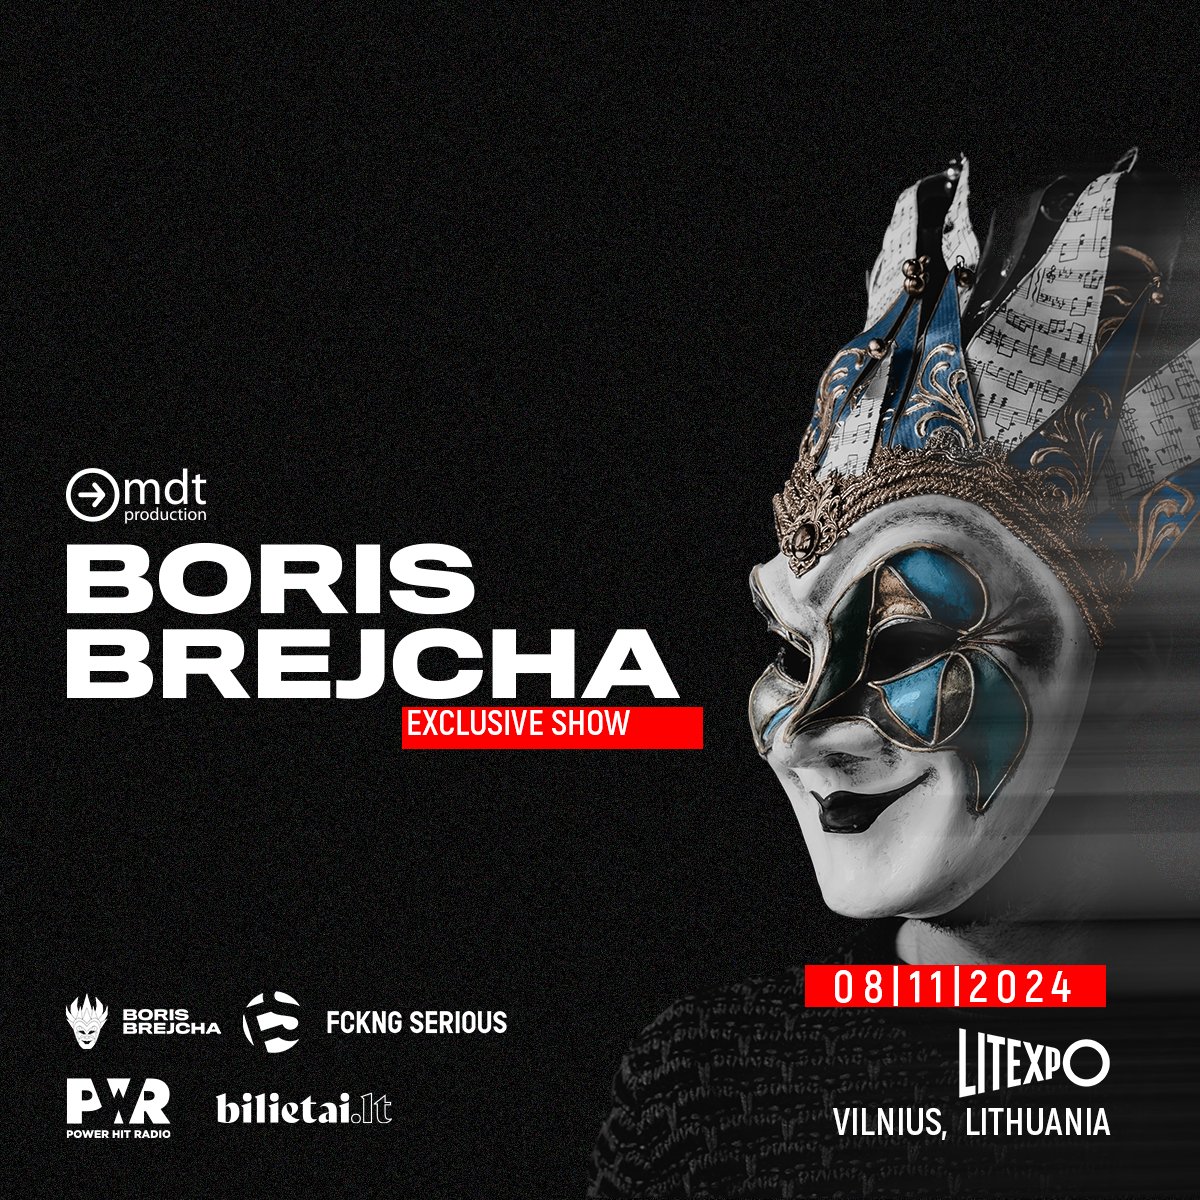 VILNIUS 🇱🇹 Coming to Lithuania for the first time 🔥 Really excited for this one! 😍 Ticket sale starts soon! _ #borisbrejcha #lithuania #show #litexpo